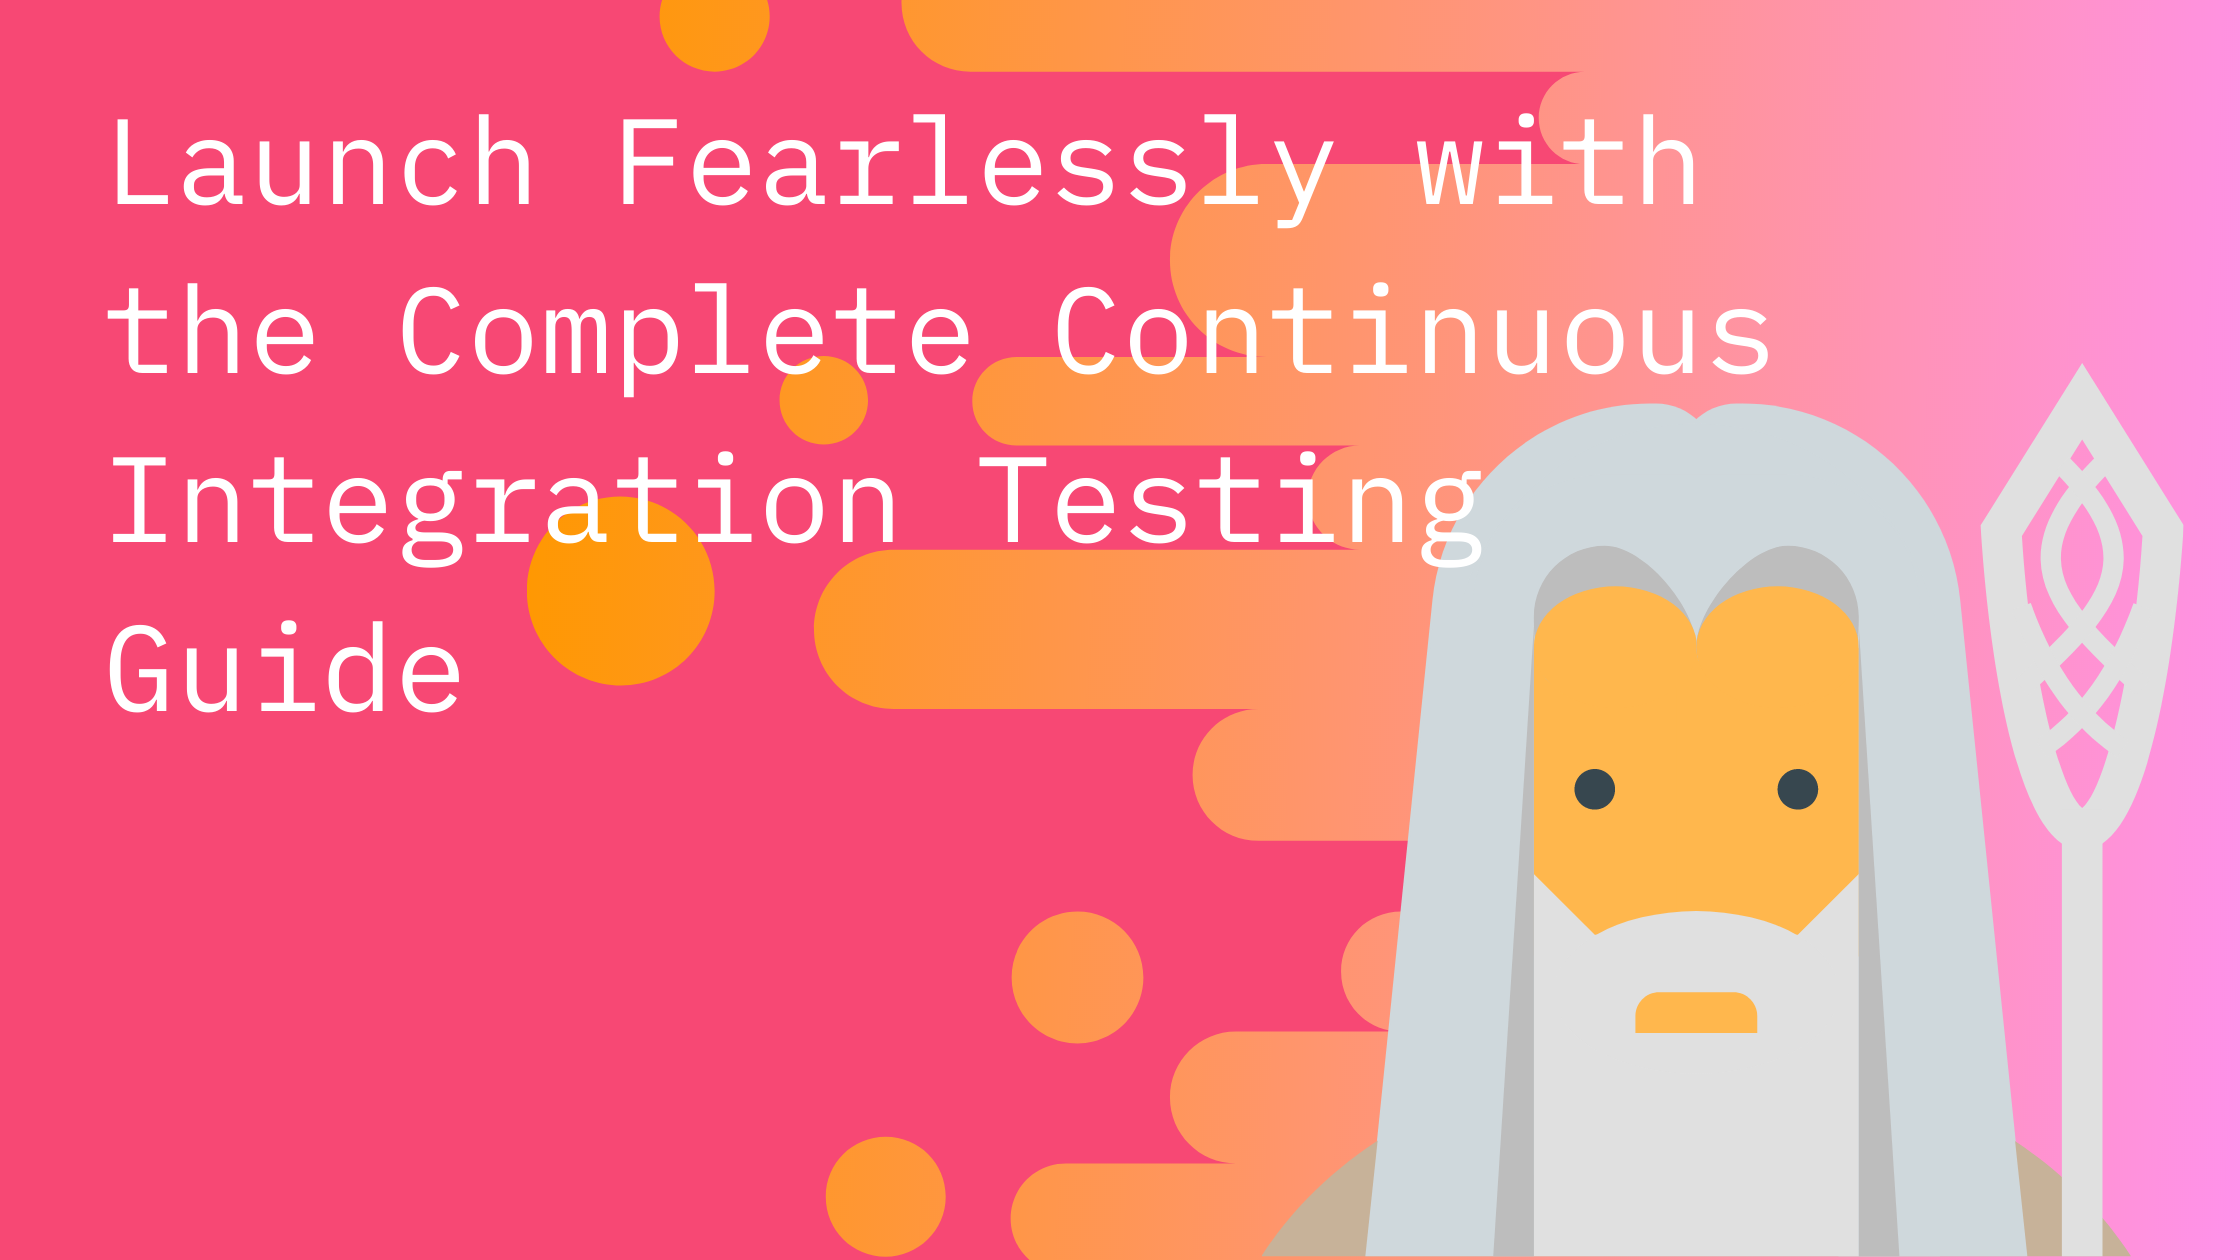 Launch Fearlessly with the Complete Continuous Integration Testing Guide